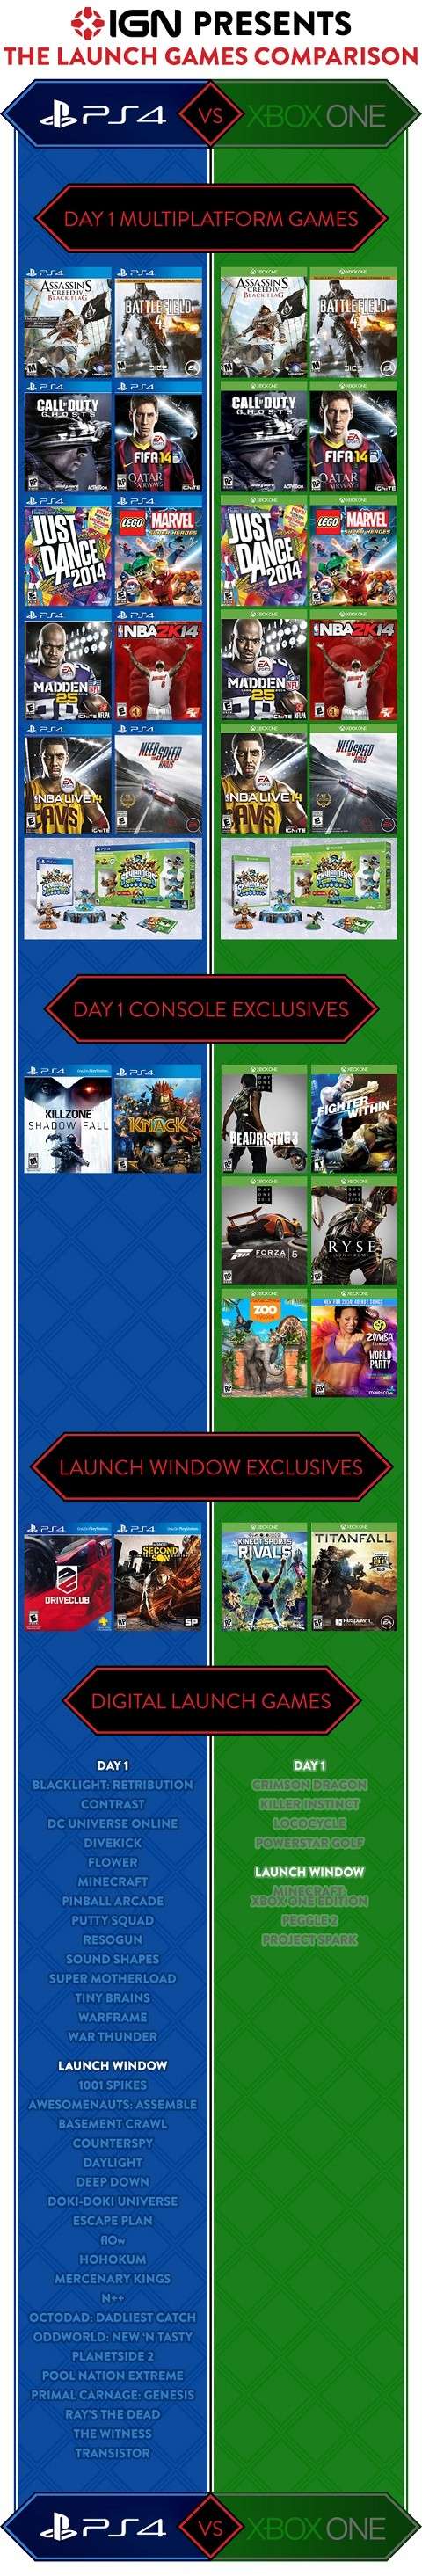 Xbox ONE, PS4, PC 4ever? - Page 2 Launch10